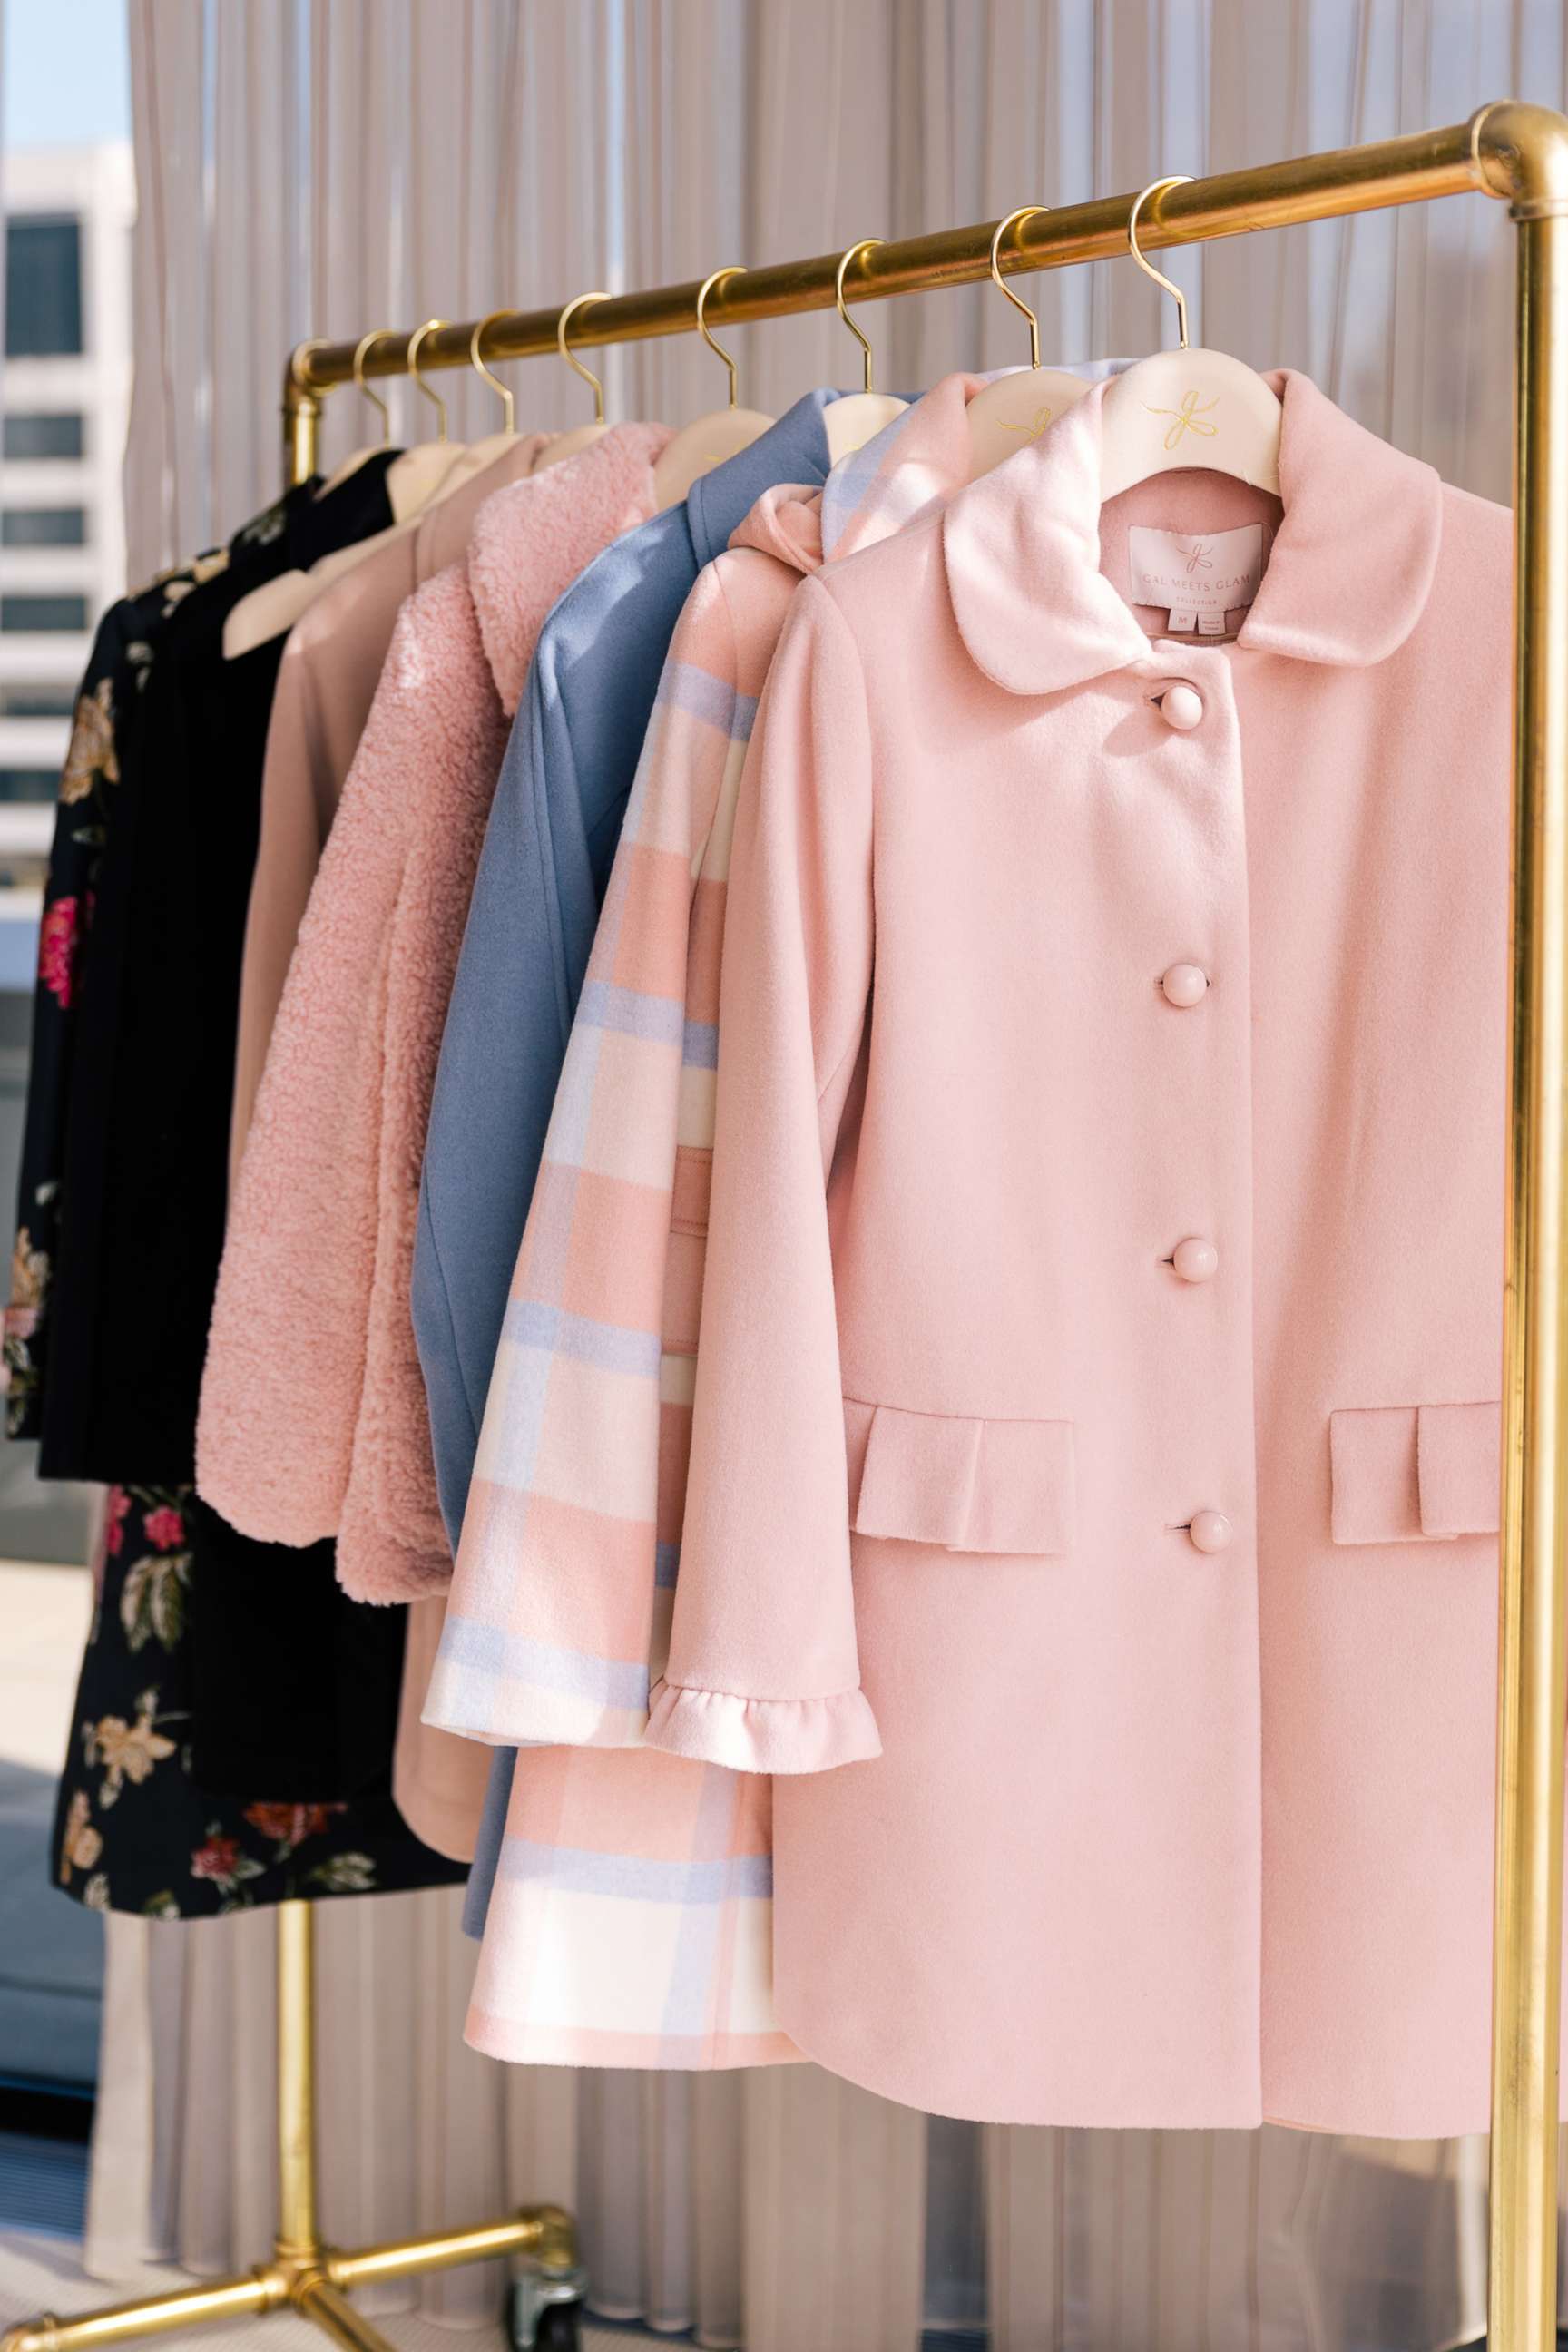 PHOTO: Julia Engel launches debut Gal Meets Glam coat collection, and spills her best coat shopping tips.